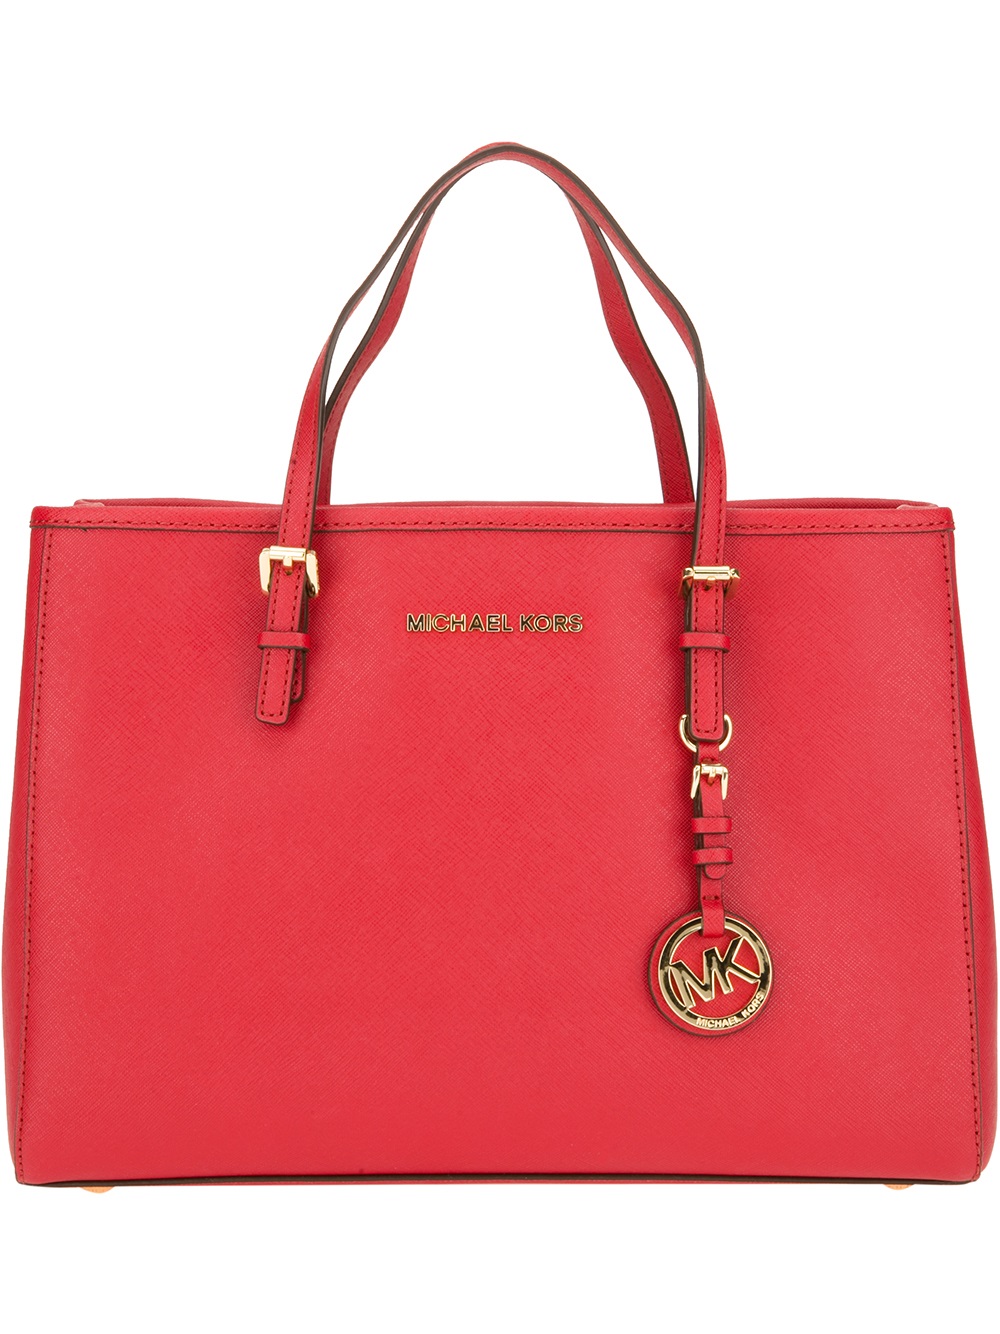 Lyst - Michael Michael Kors Jet Set Travel Tote in Red